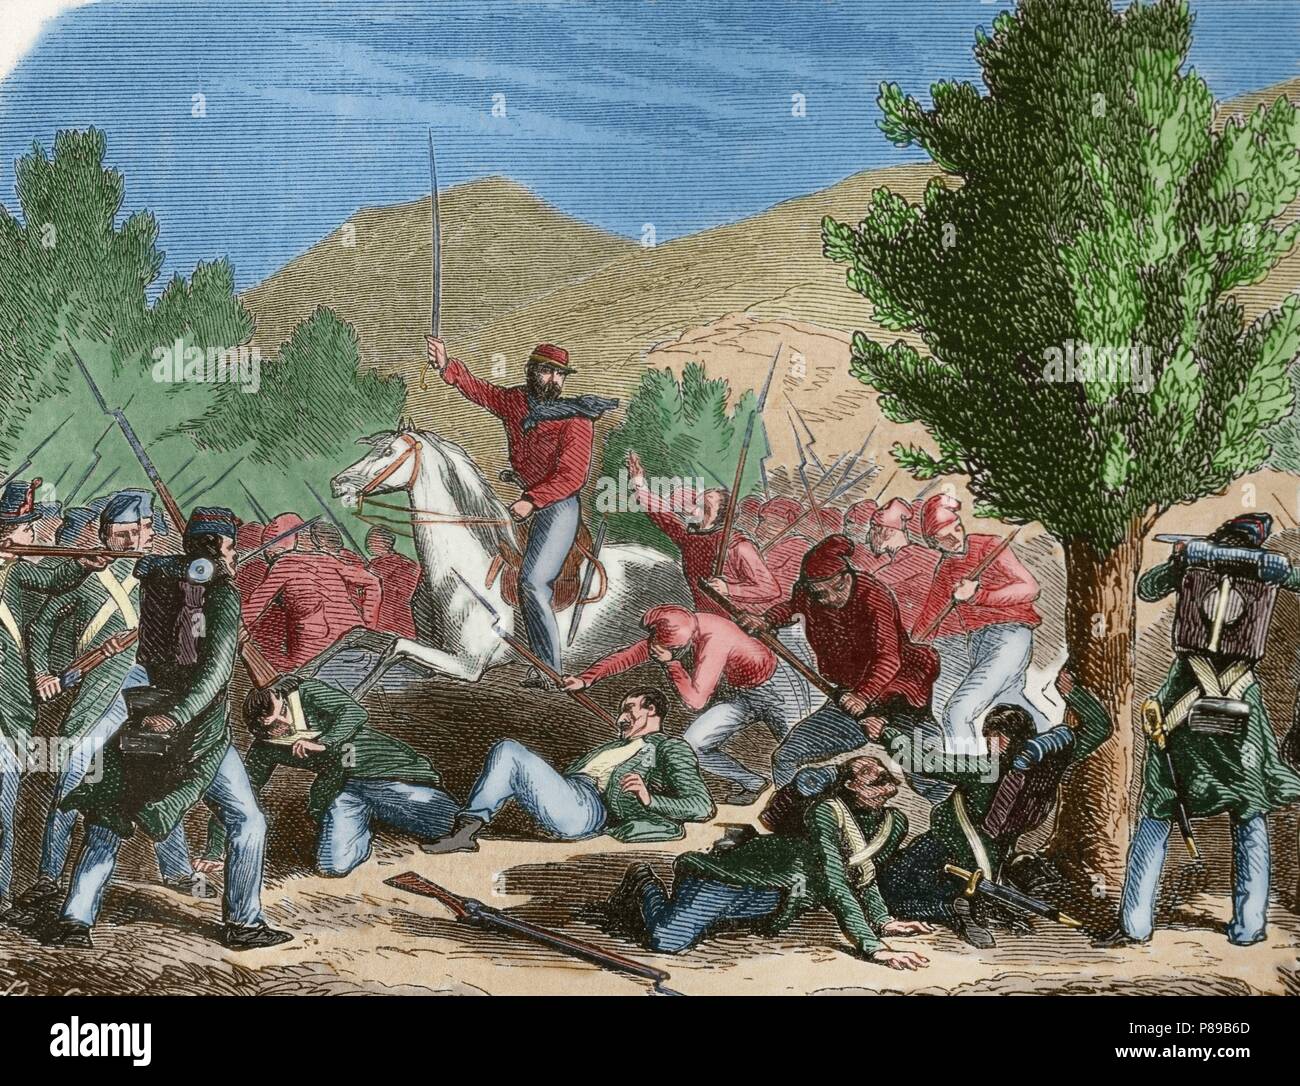 Italian unification (1859-1924). The Expedition of the Thousand. The Battle of Volturnus or Volturno (1860) between Giuseppe Garibaldi's volunteers (Red shirts) and Hungarian veterans and the troops of the Kingdom of the Two Sicilies, ruled by the Bourbons.'L'Illustration' (1860). Engraving. Colored. Stock Photo